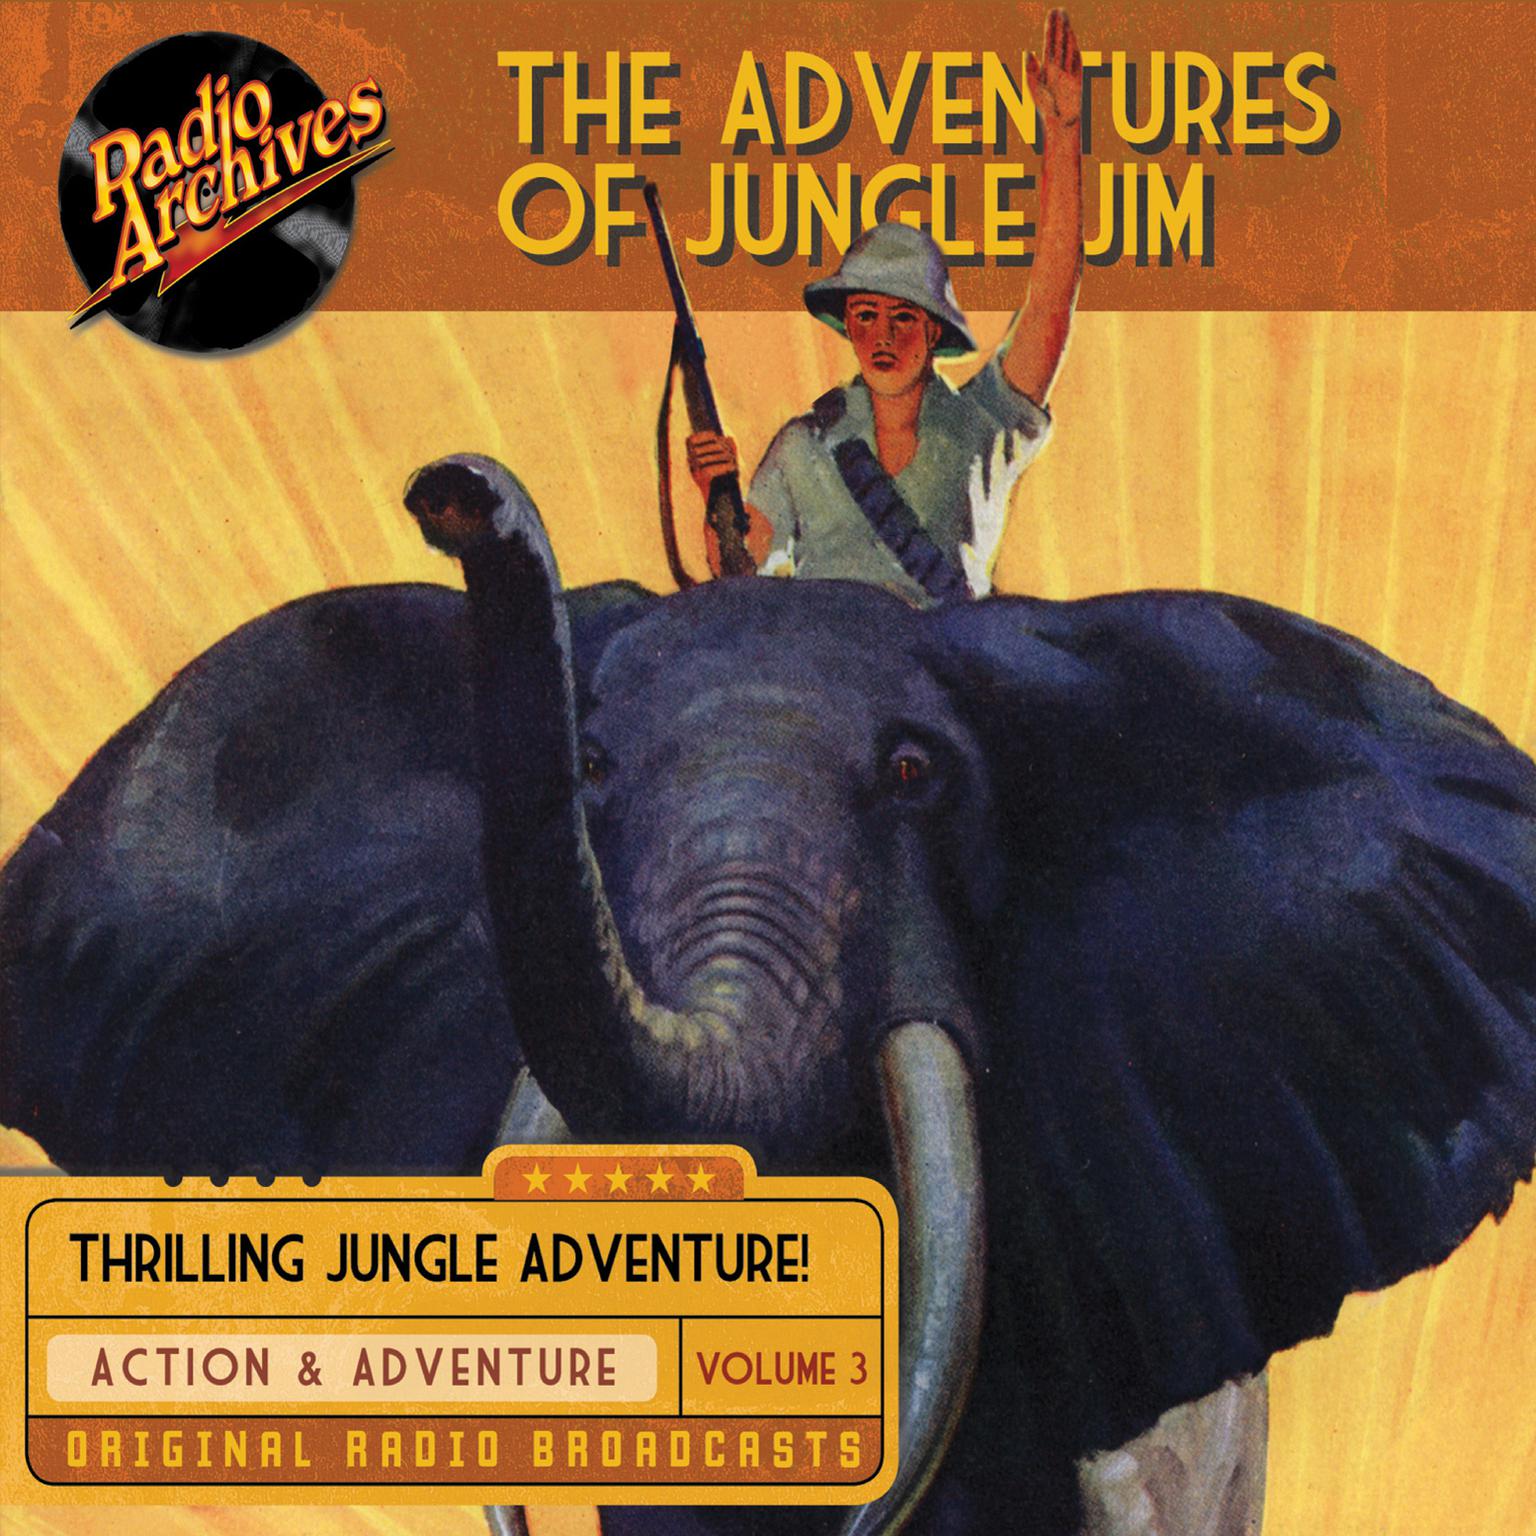 The Adventures of Jungle Jim, Volume 3 Audiobook, by Gene Stafford